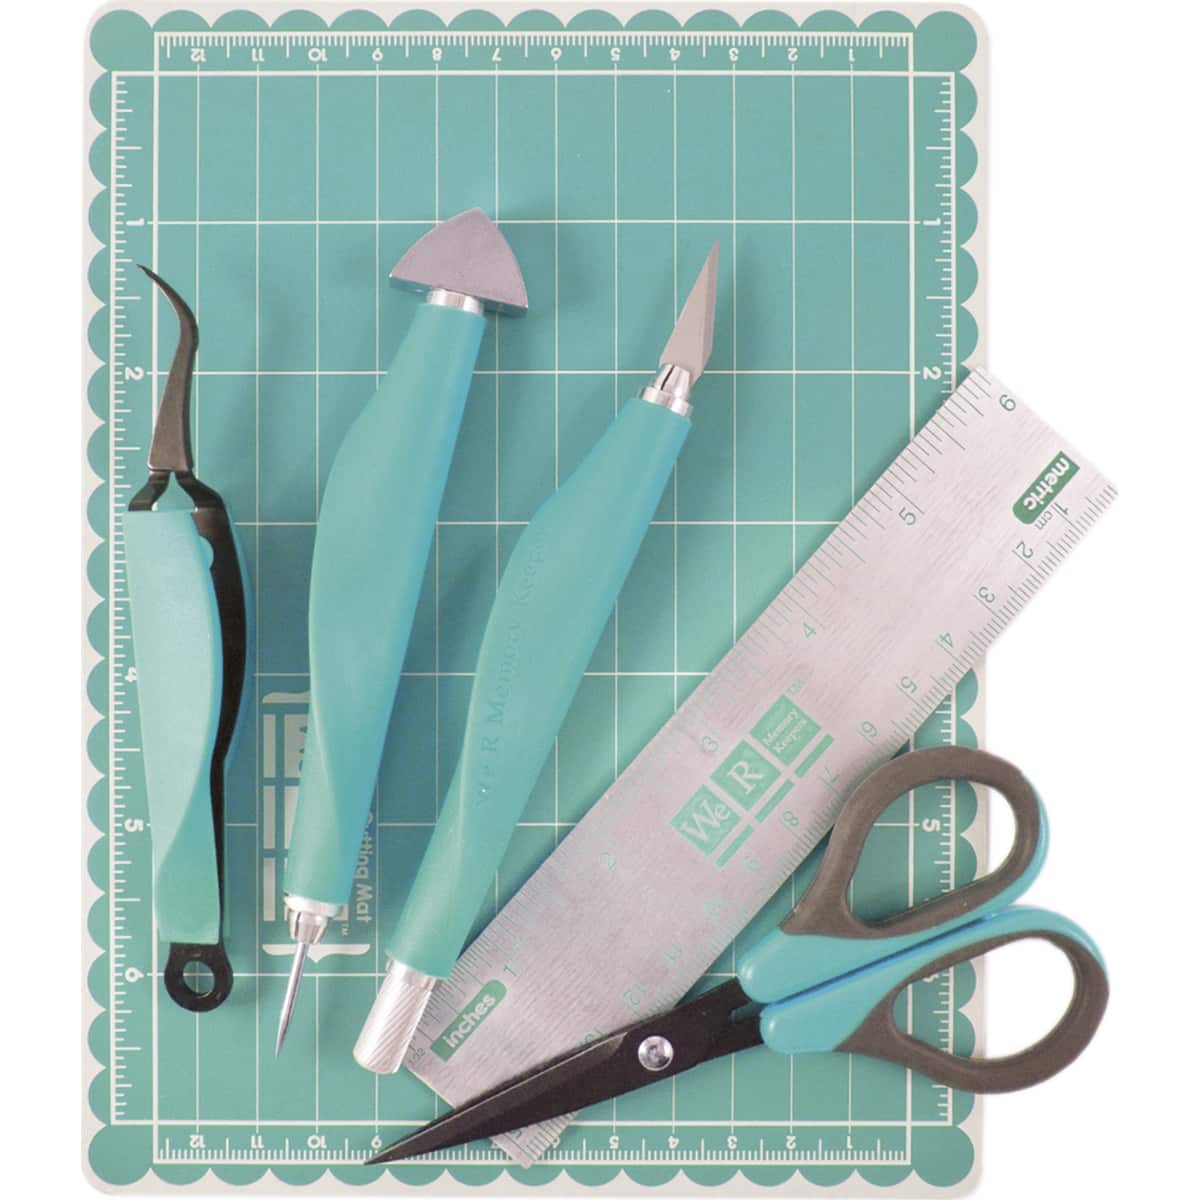 We R Crafter's Essentials Magnetic Cutting Mat and Mini Ruler